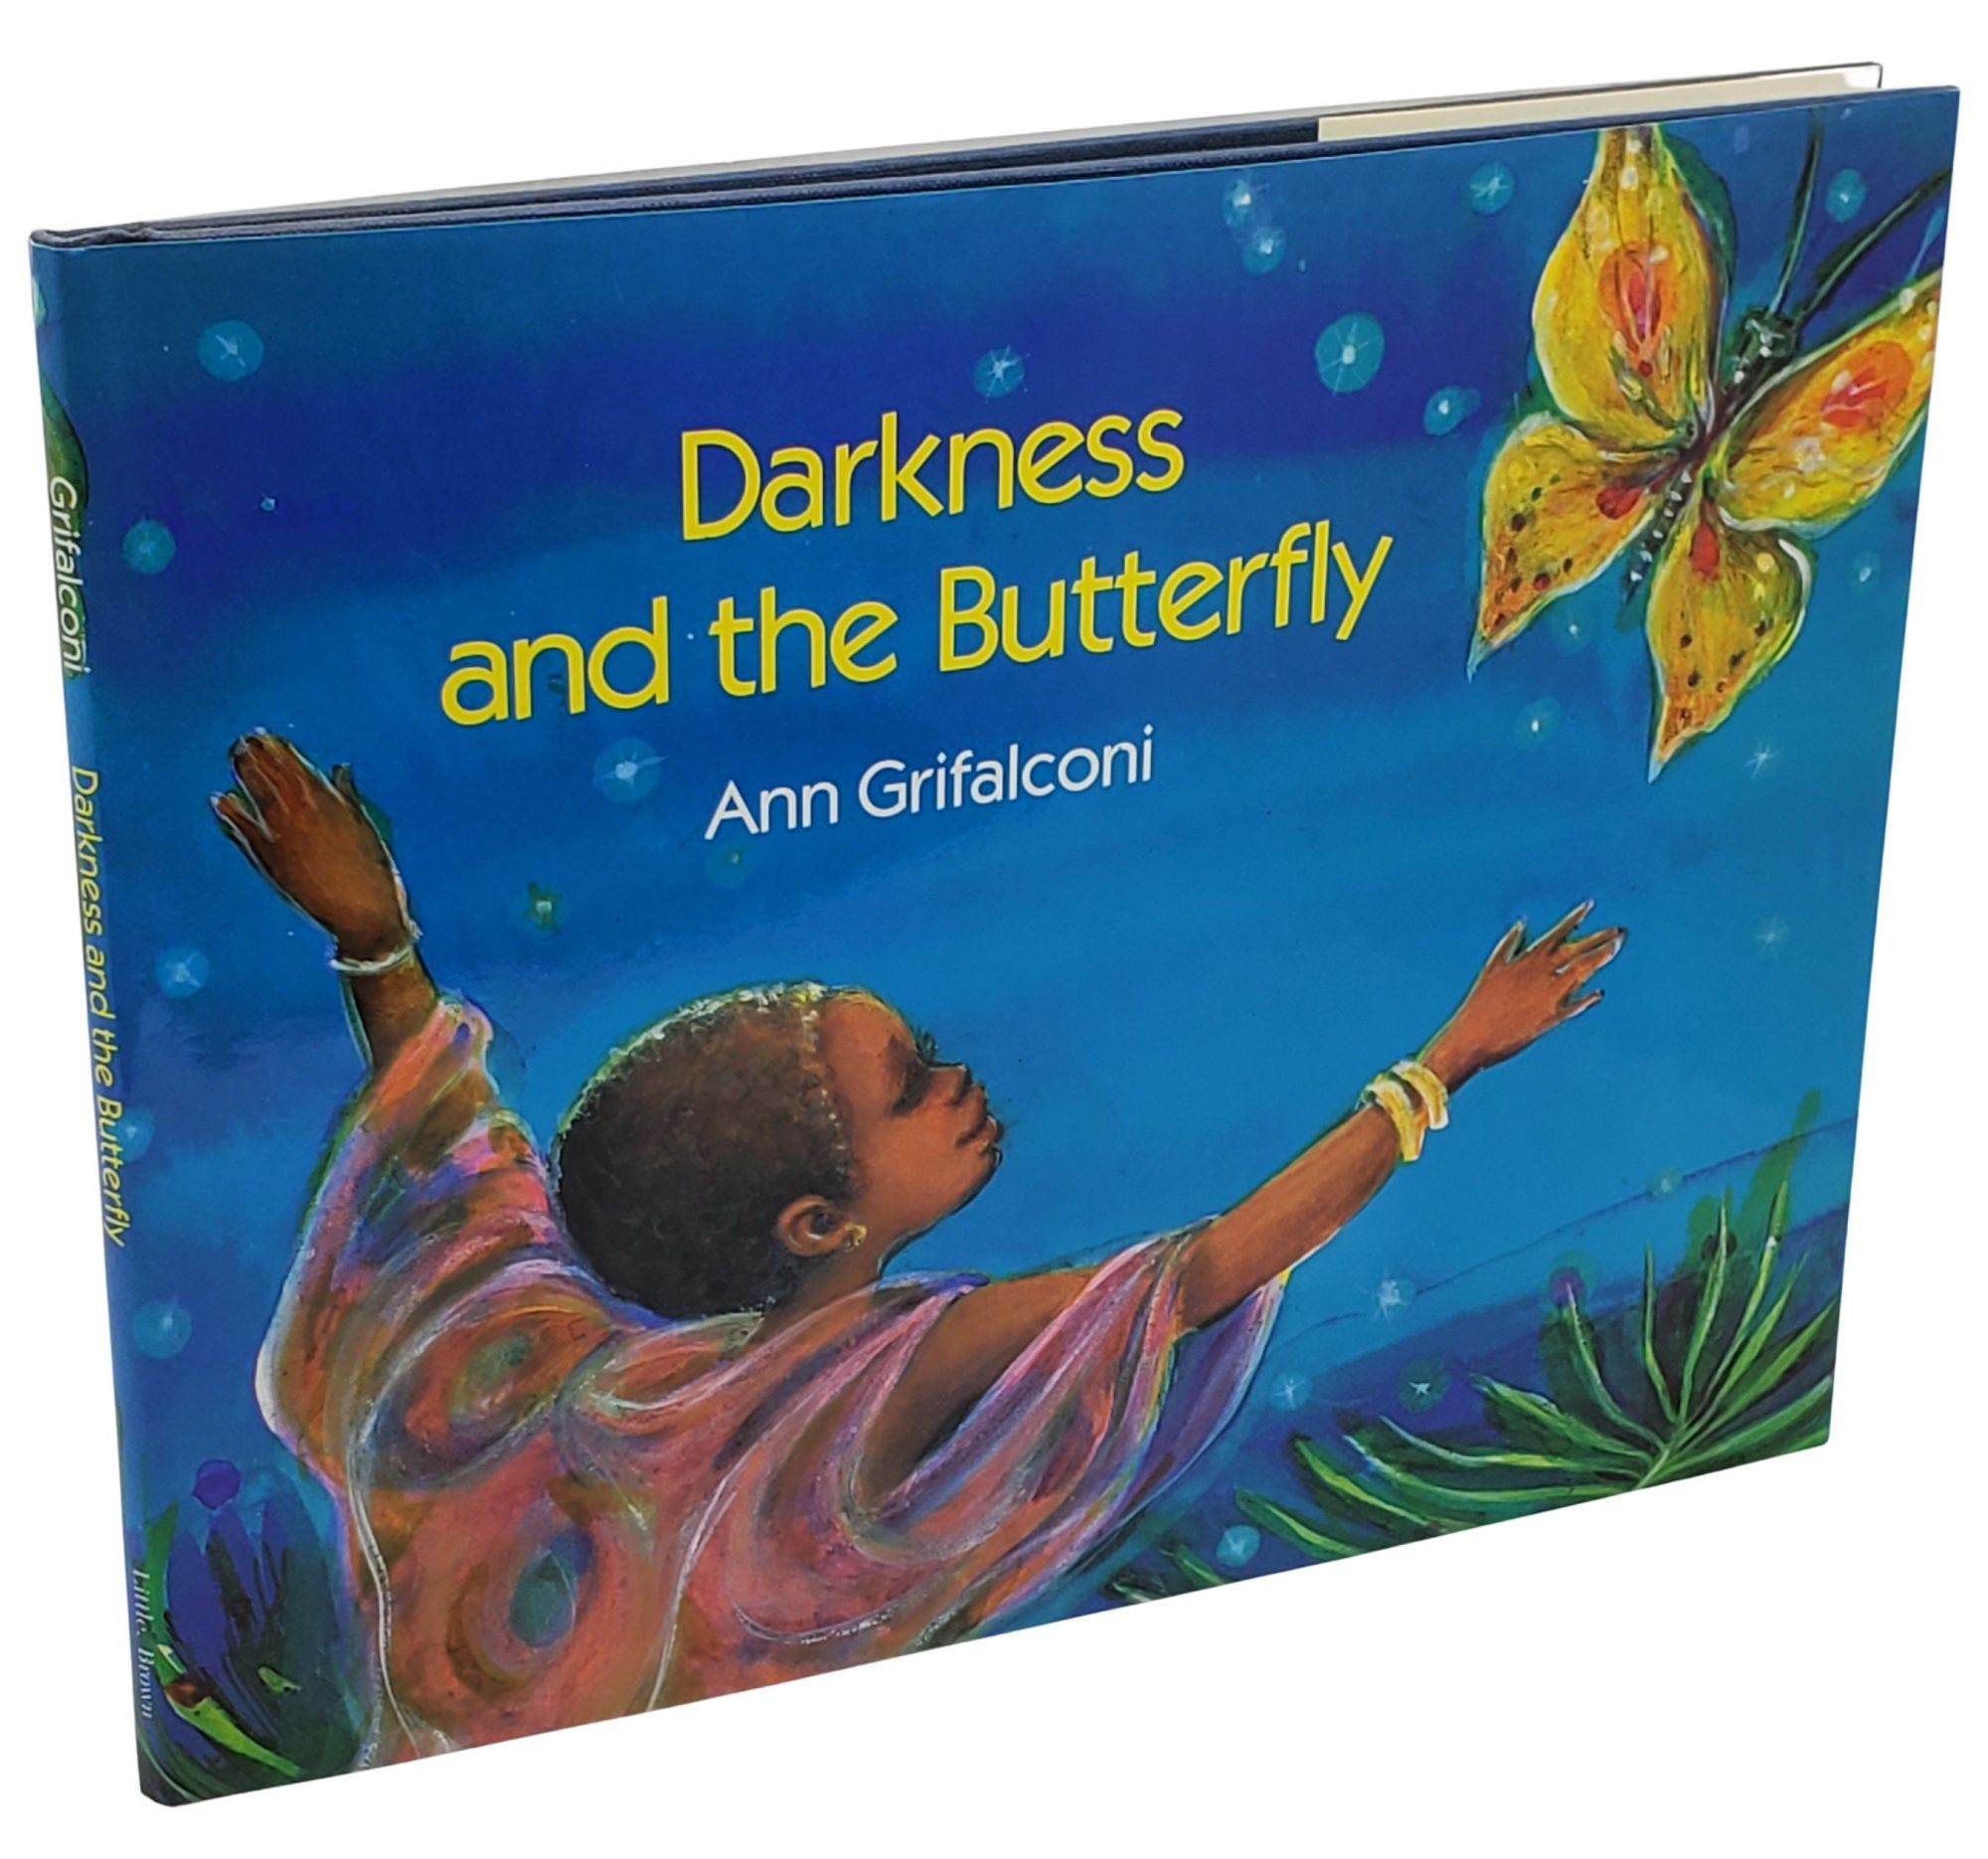 [Book #24664] DARKNESS AND THE BUTTERFLY. Ann Grifalconi.